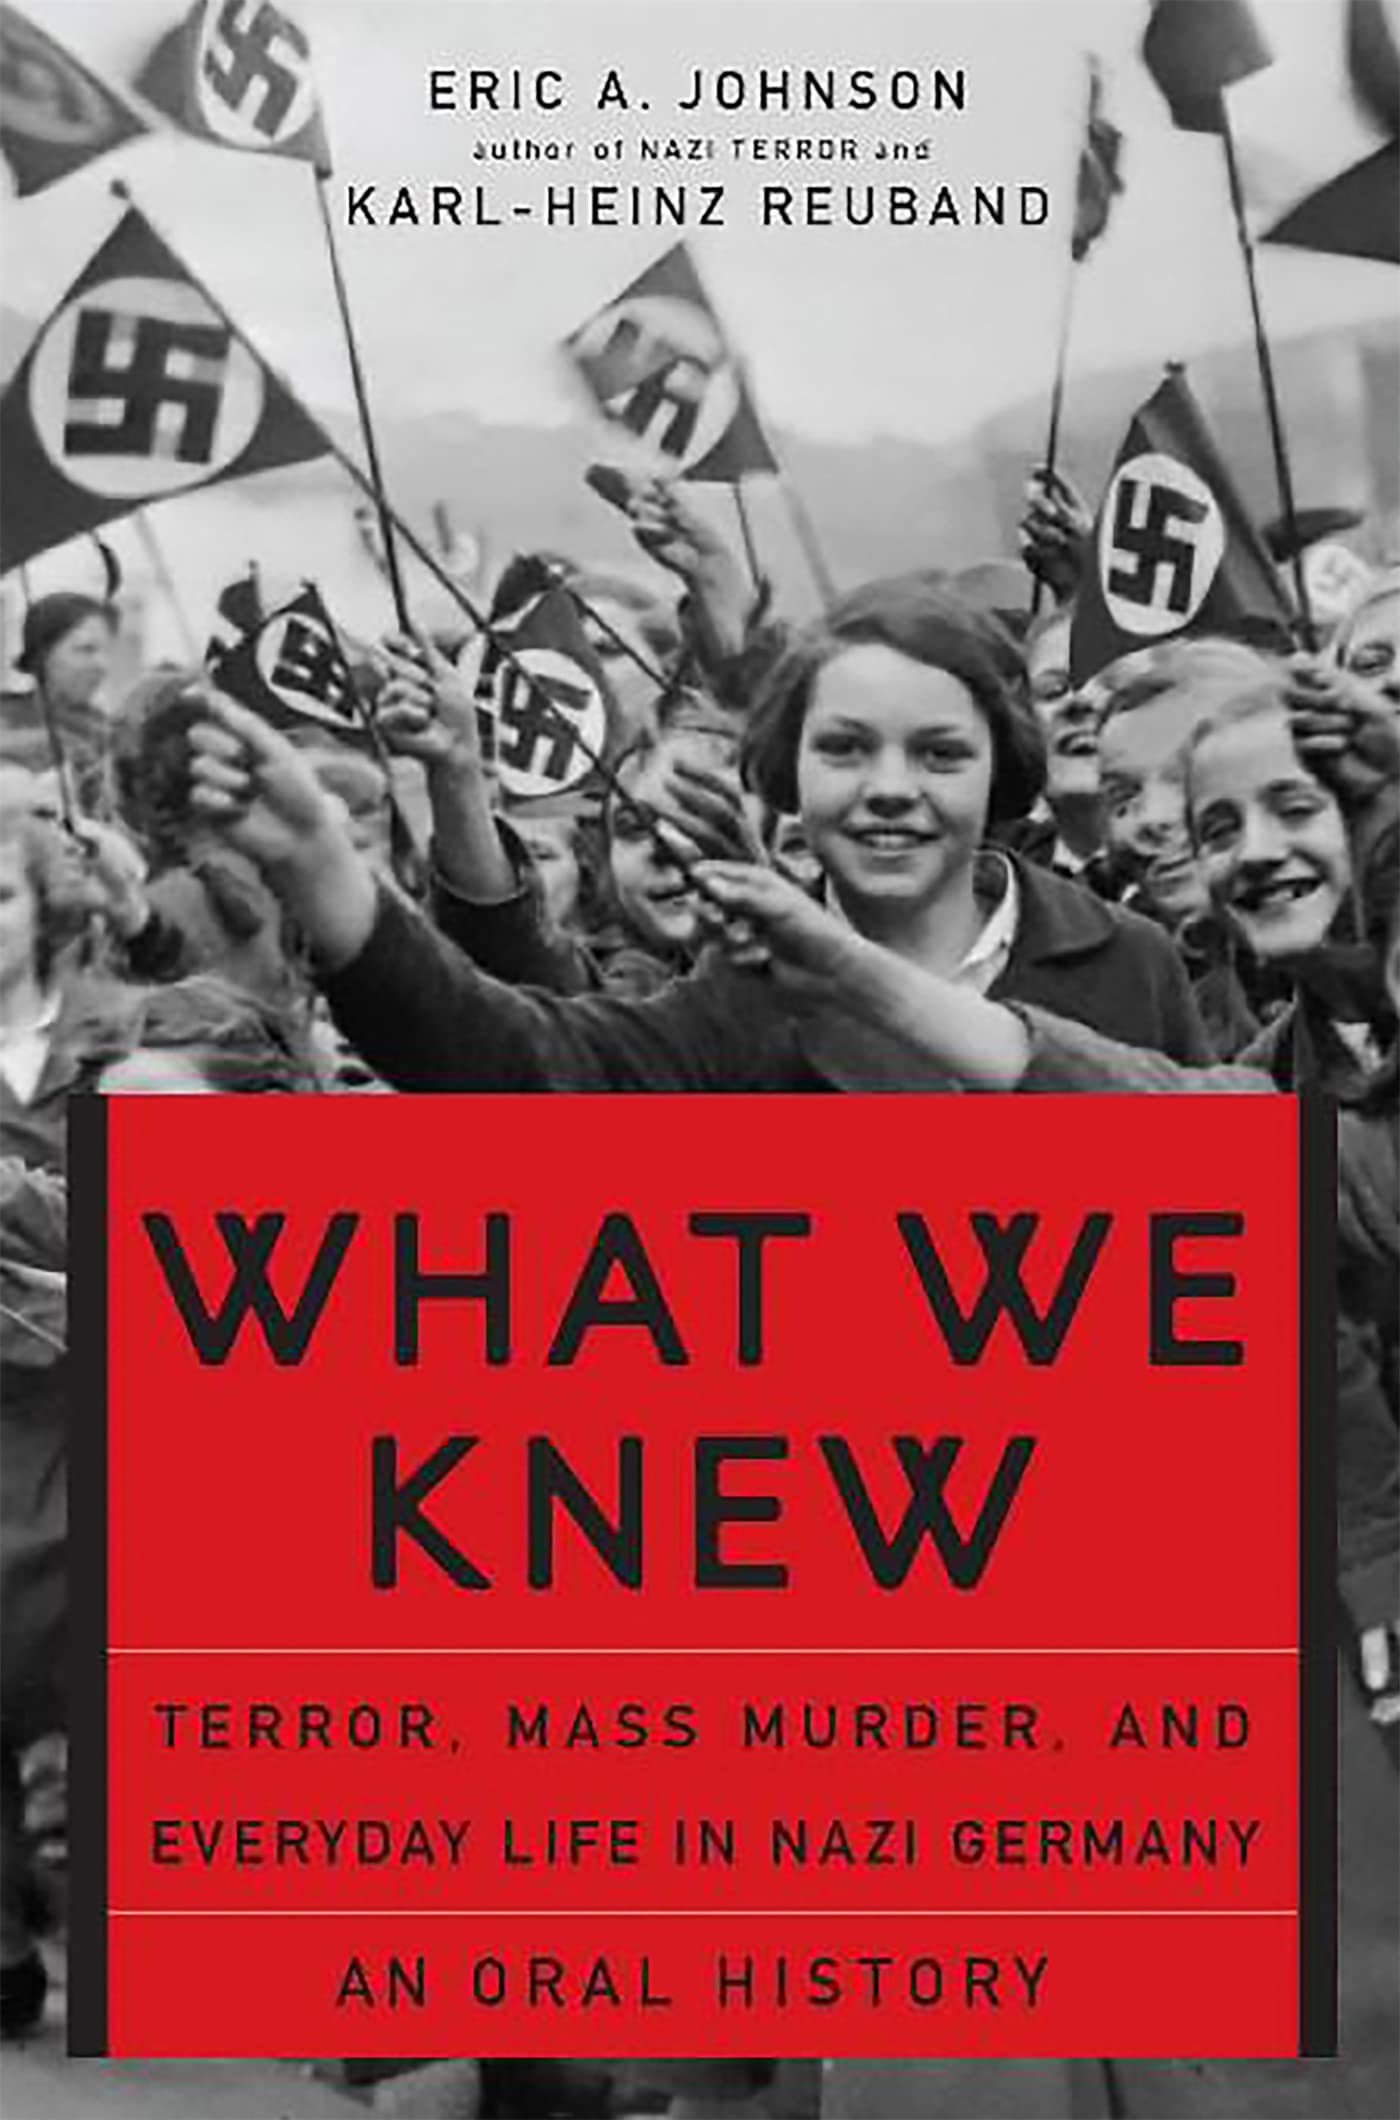 What We Knew: Terror, mass murder and everyday life in Nazi Germany